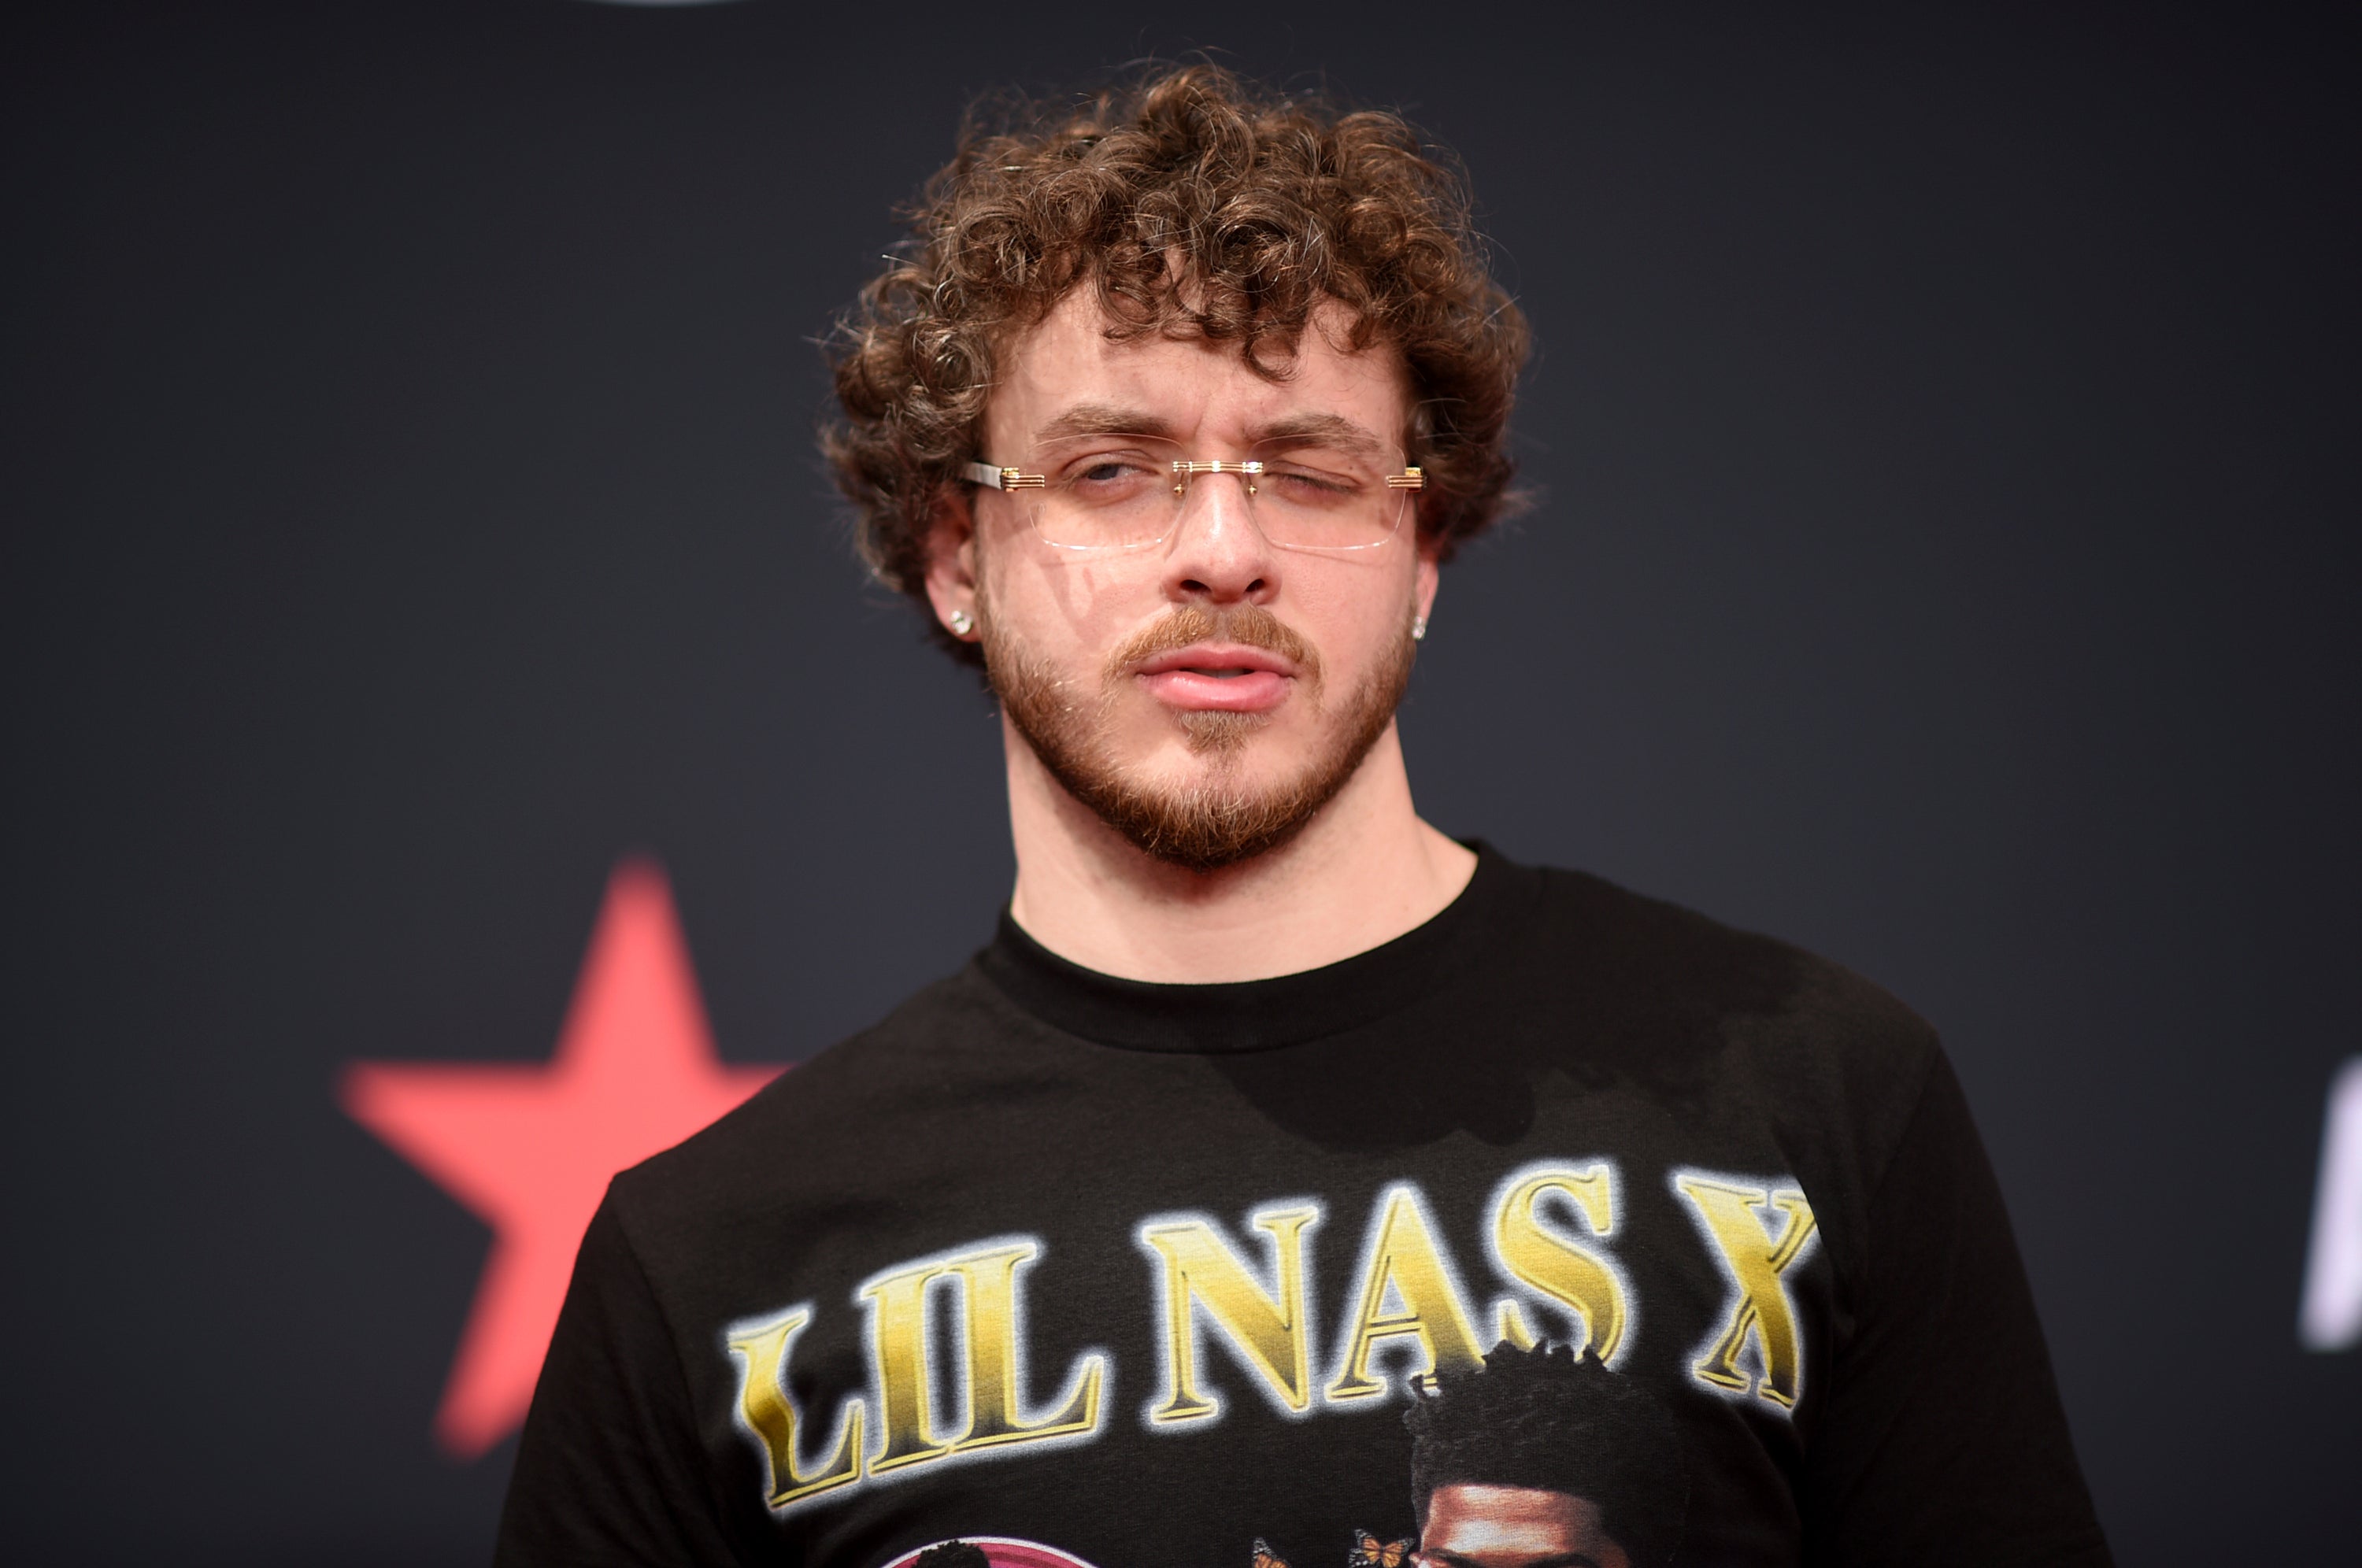 Louisville Live 2022: Jack Harlow will be special guest host